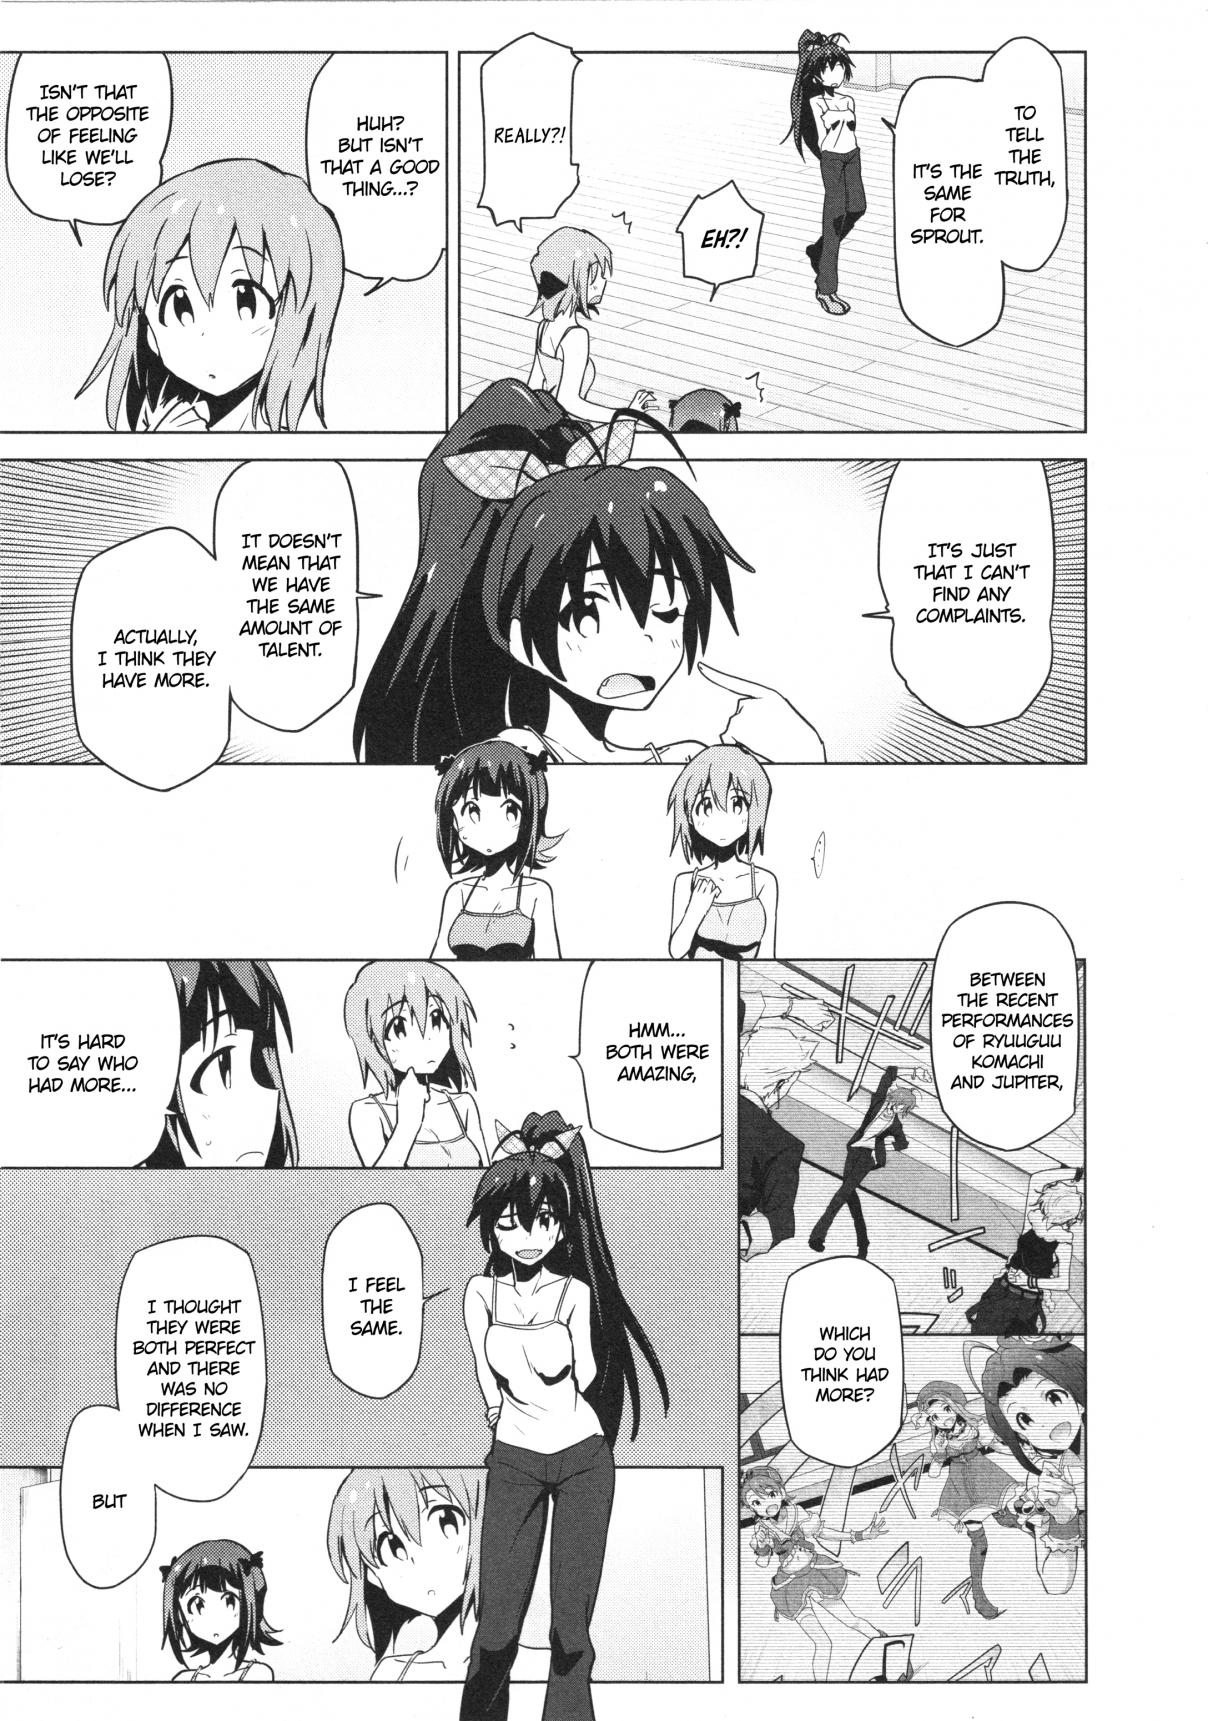 THE iDOLM@STER 2 The world is all one!! Vol. 4 Ch. 27 Next Case